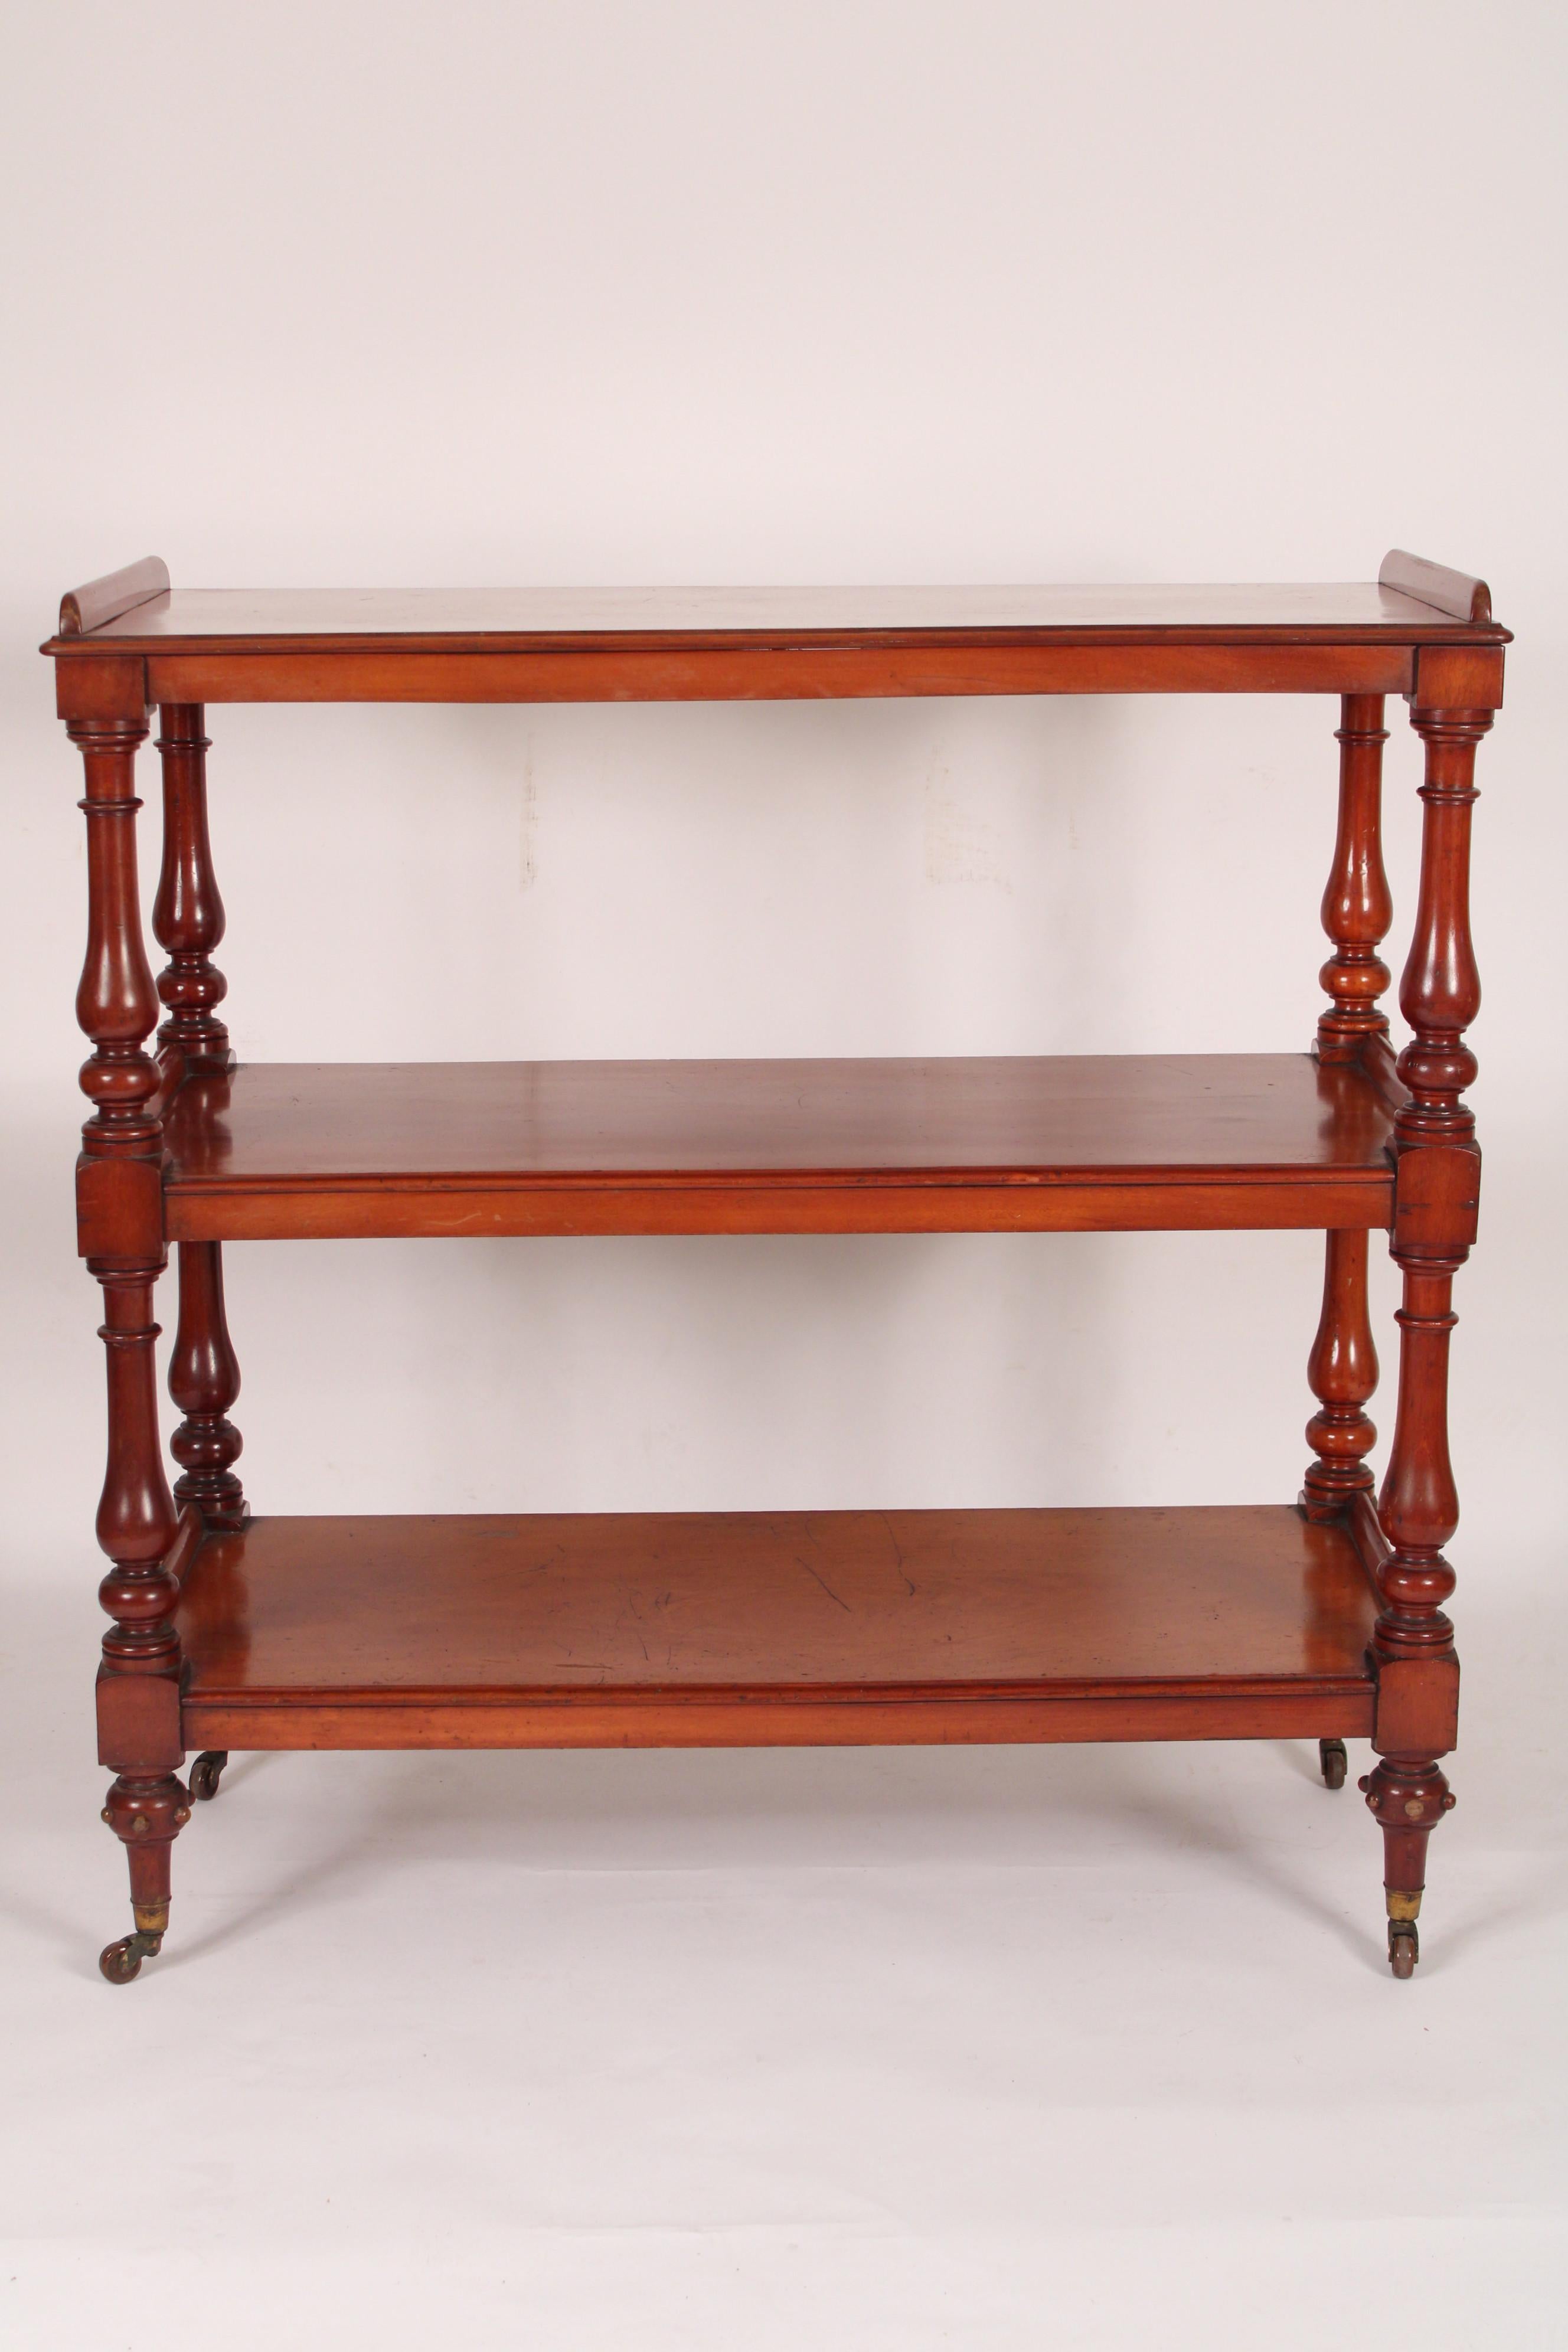 Antique William IV style mahogany 3 tier trolley / etagere, on brass wheels, late 19th century. The brass feet are stamped W. Hopkins & Son, Birmingham.